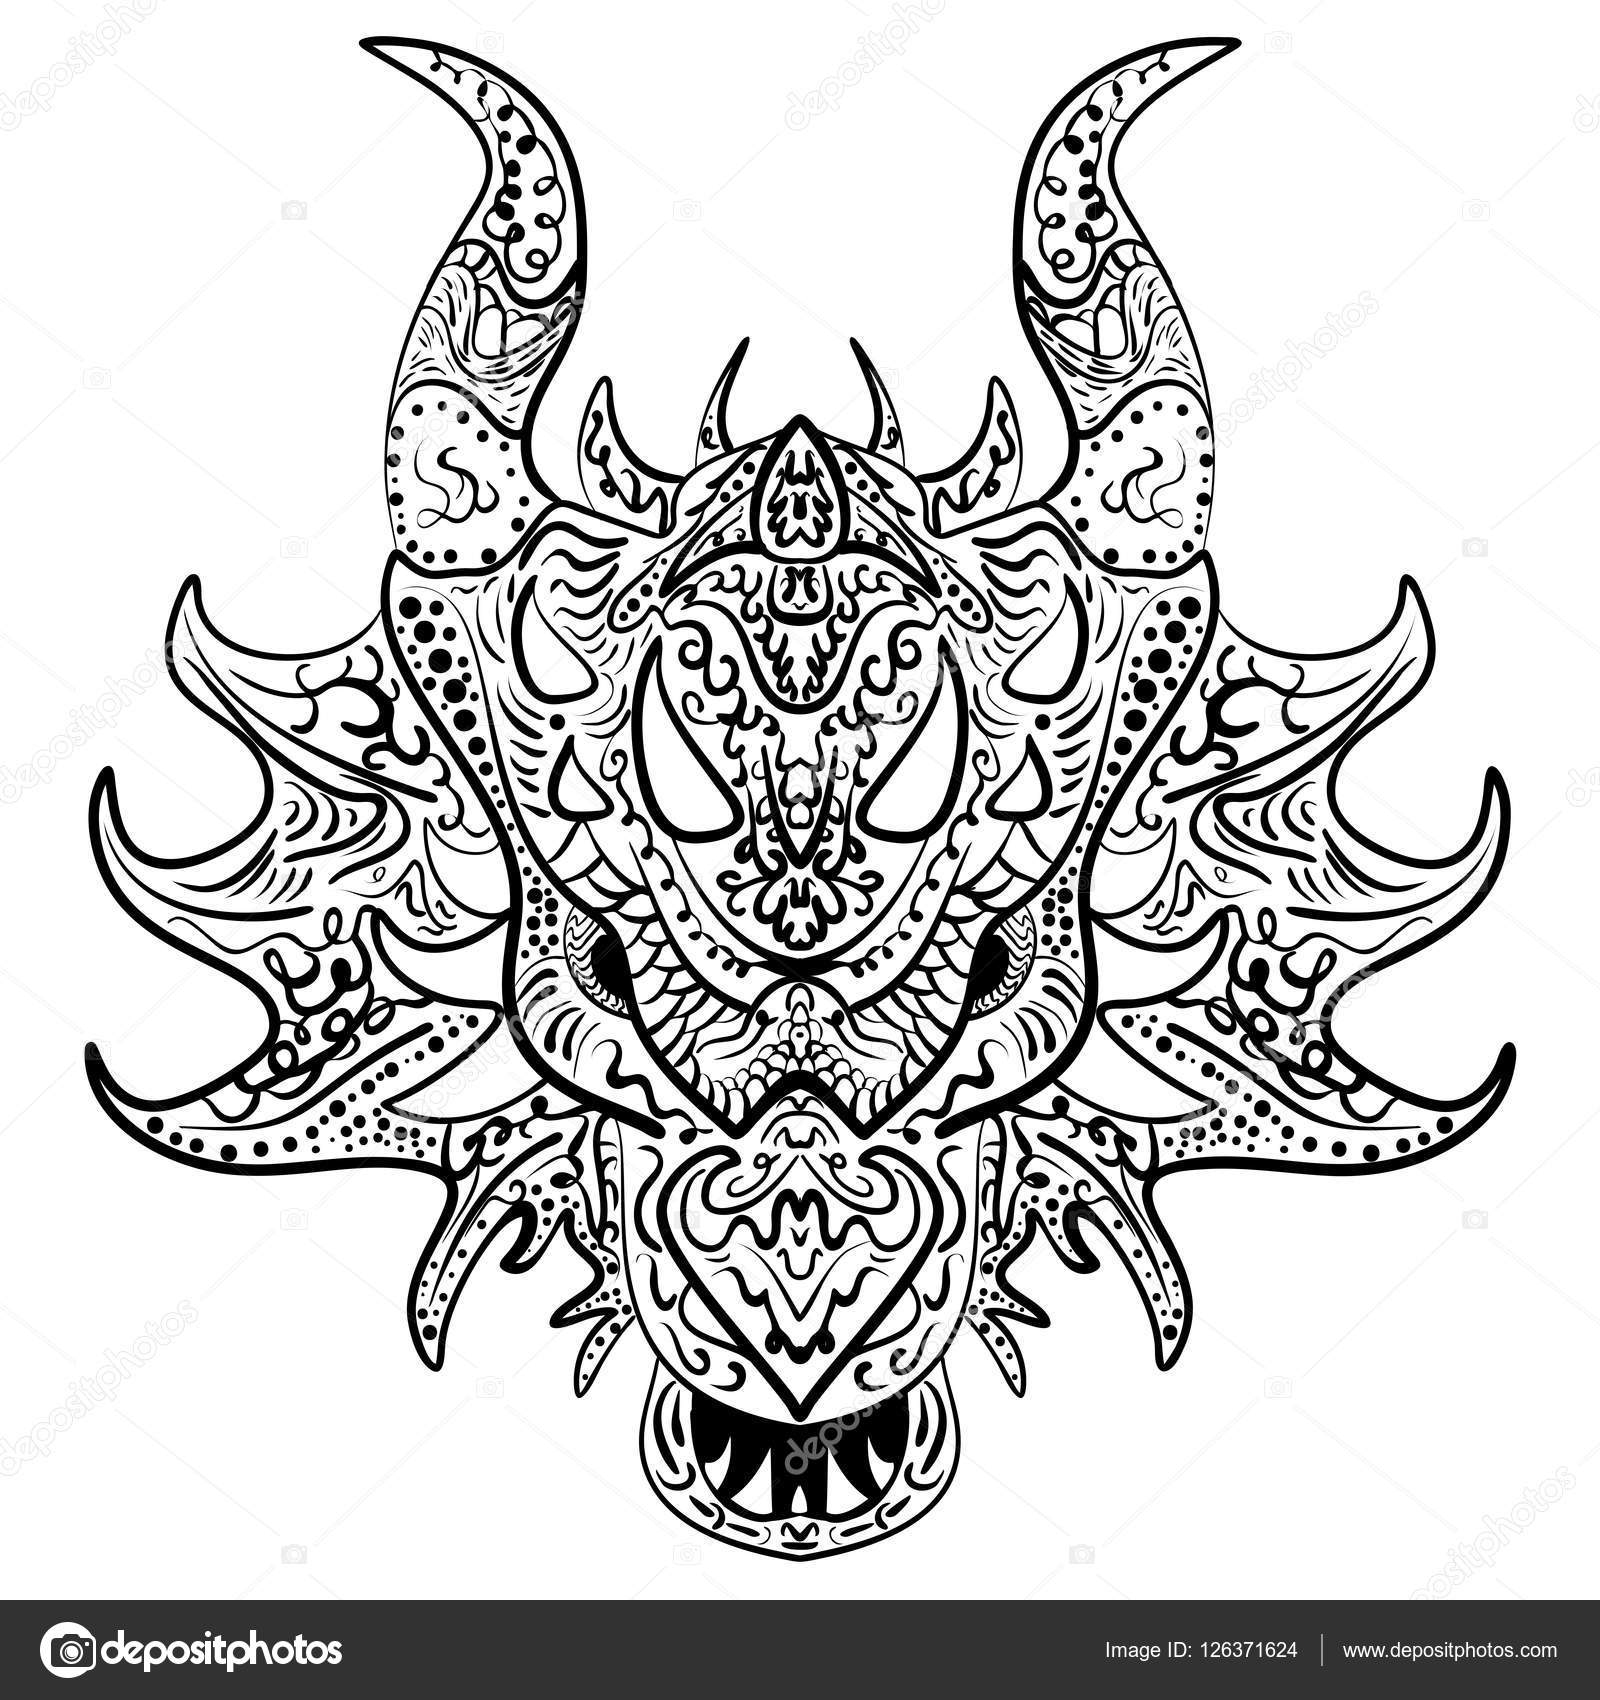 Black And White Sketch Dragon Head Zen-Tangle Stock Vector By ©Tiverets  126371624